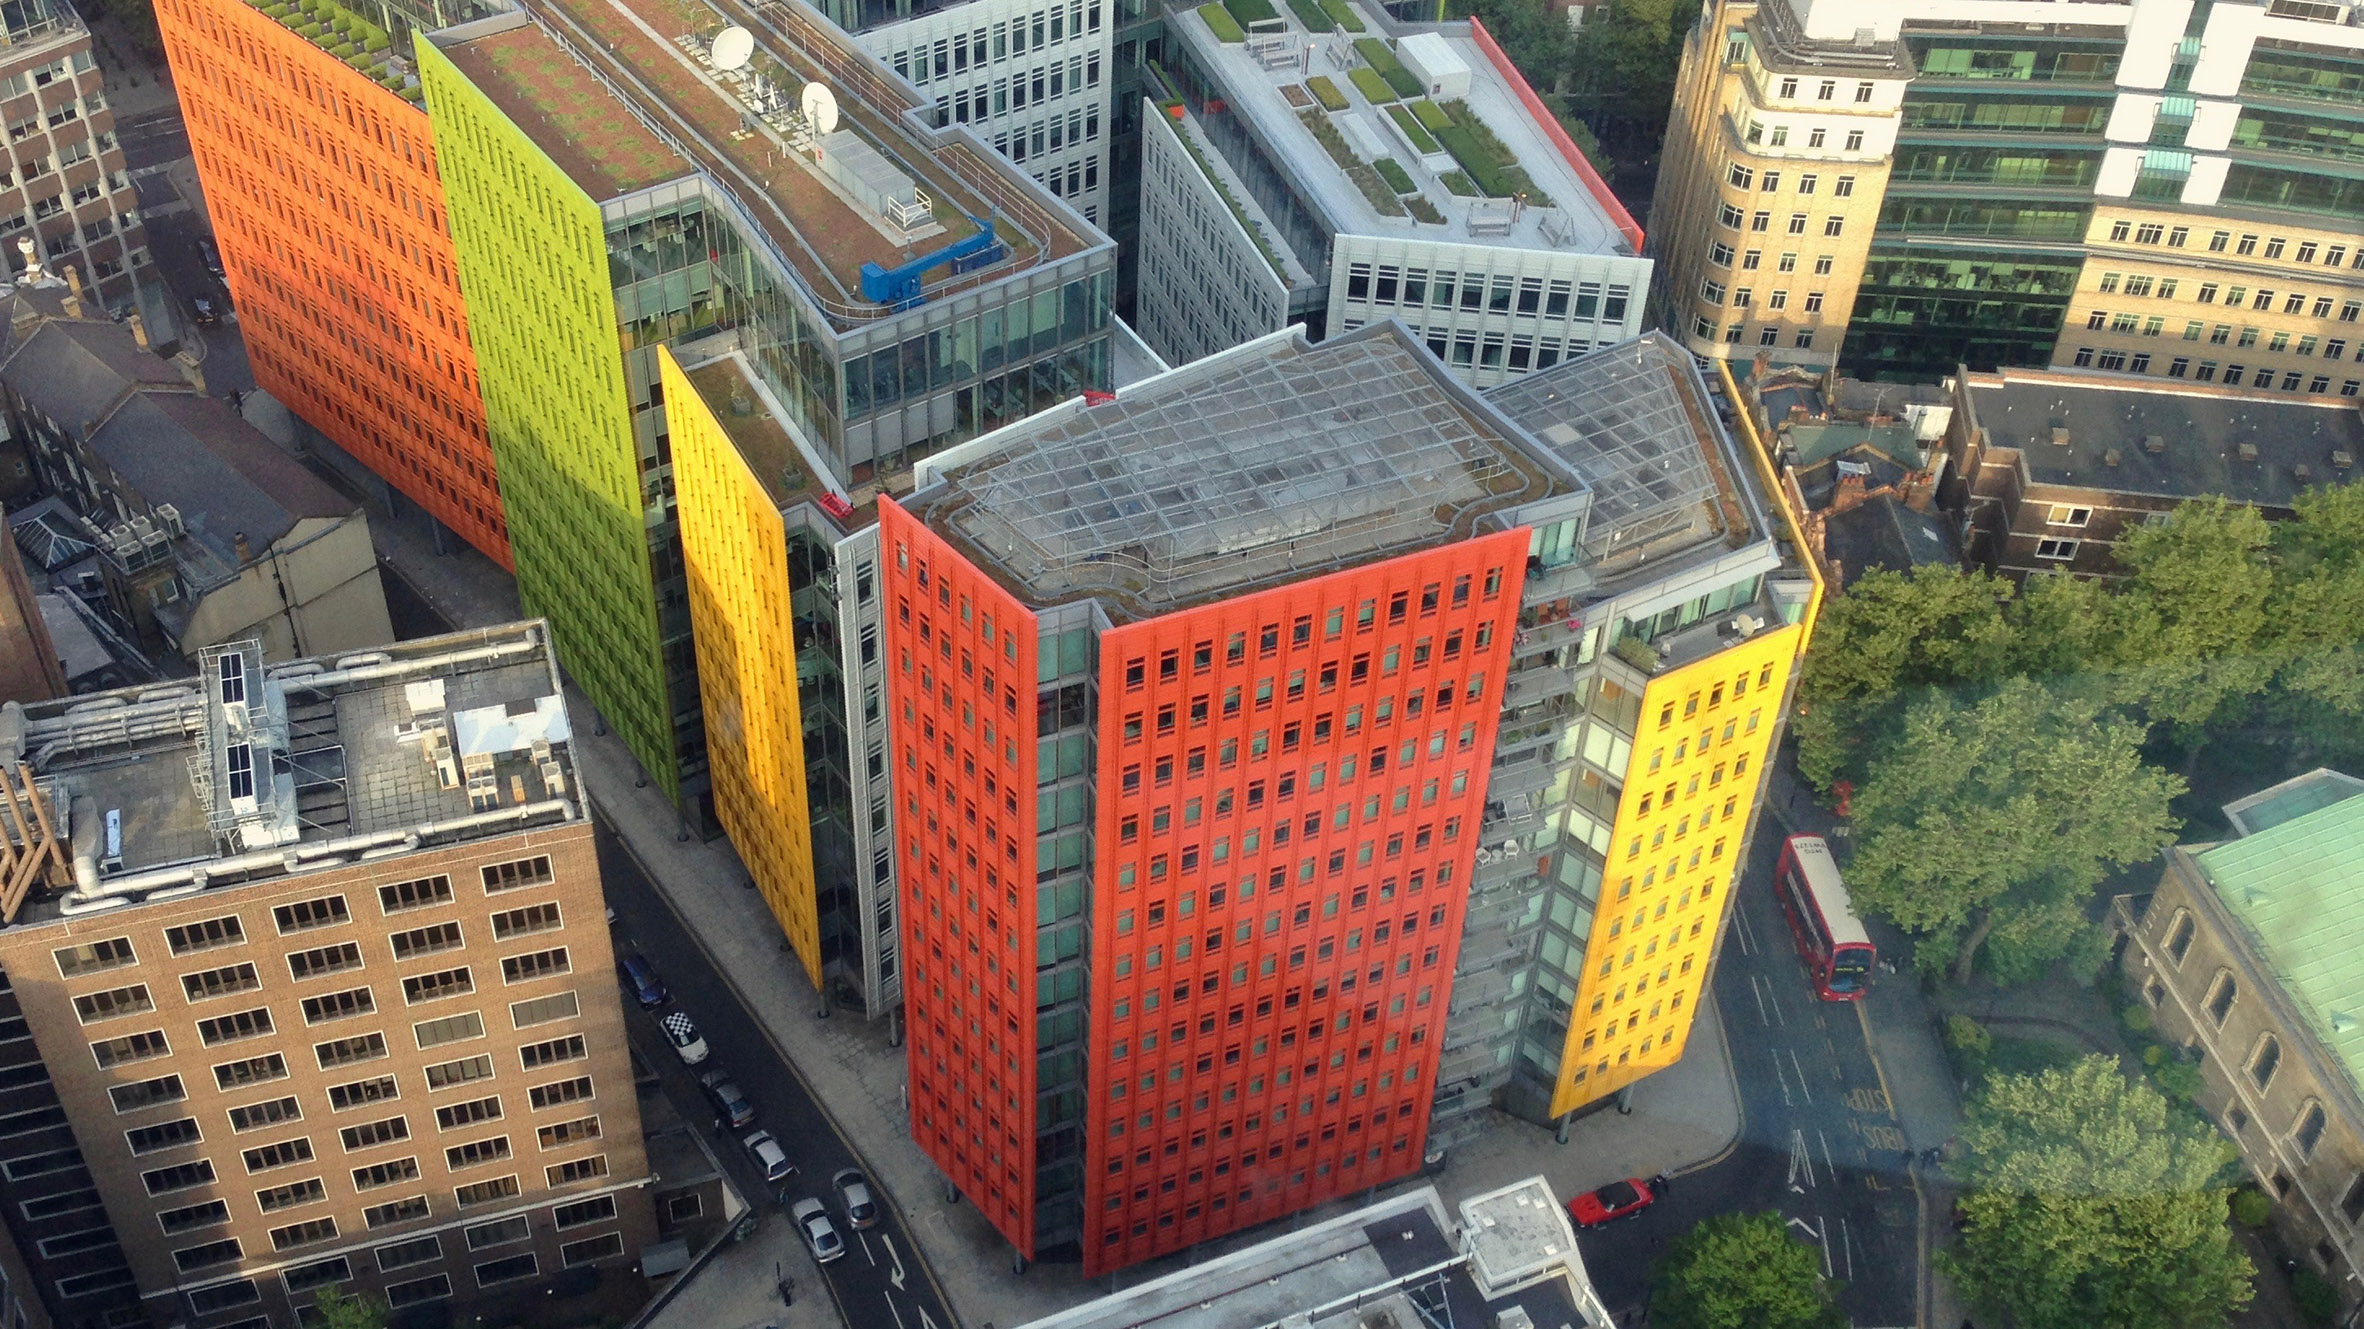 Google buys Renzo Piano&Central Saint Giles for London office